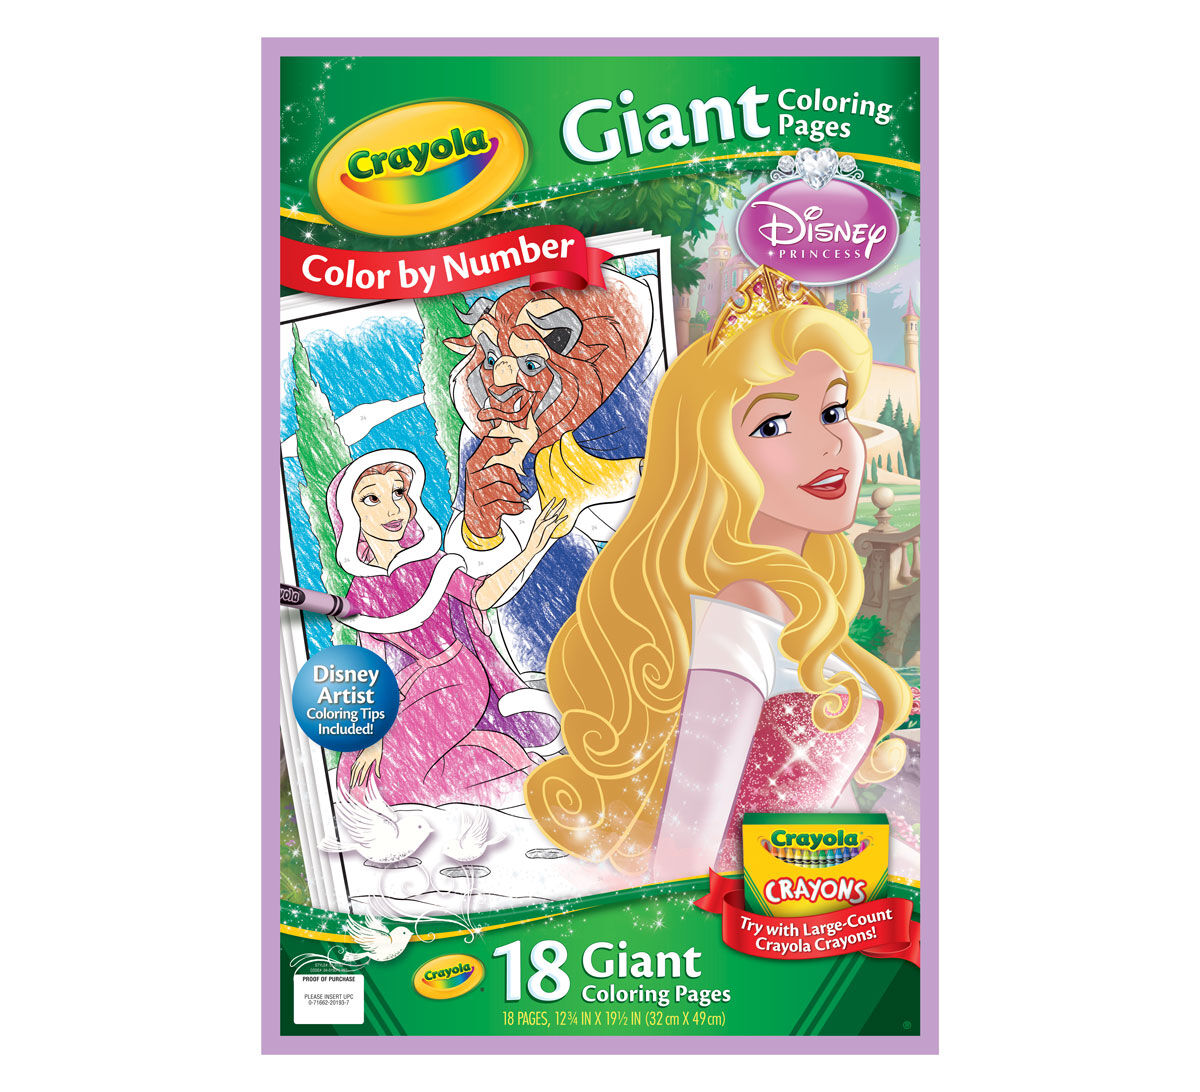 Giant Coloring Pages - Disney Princess - Crayola